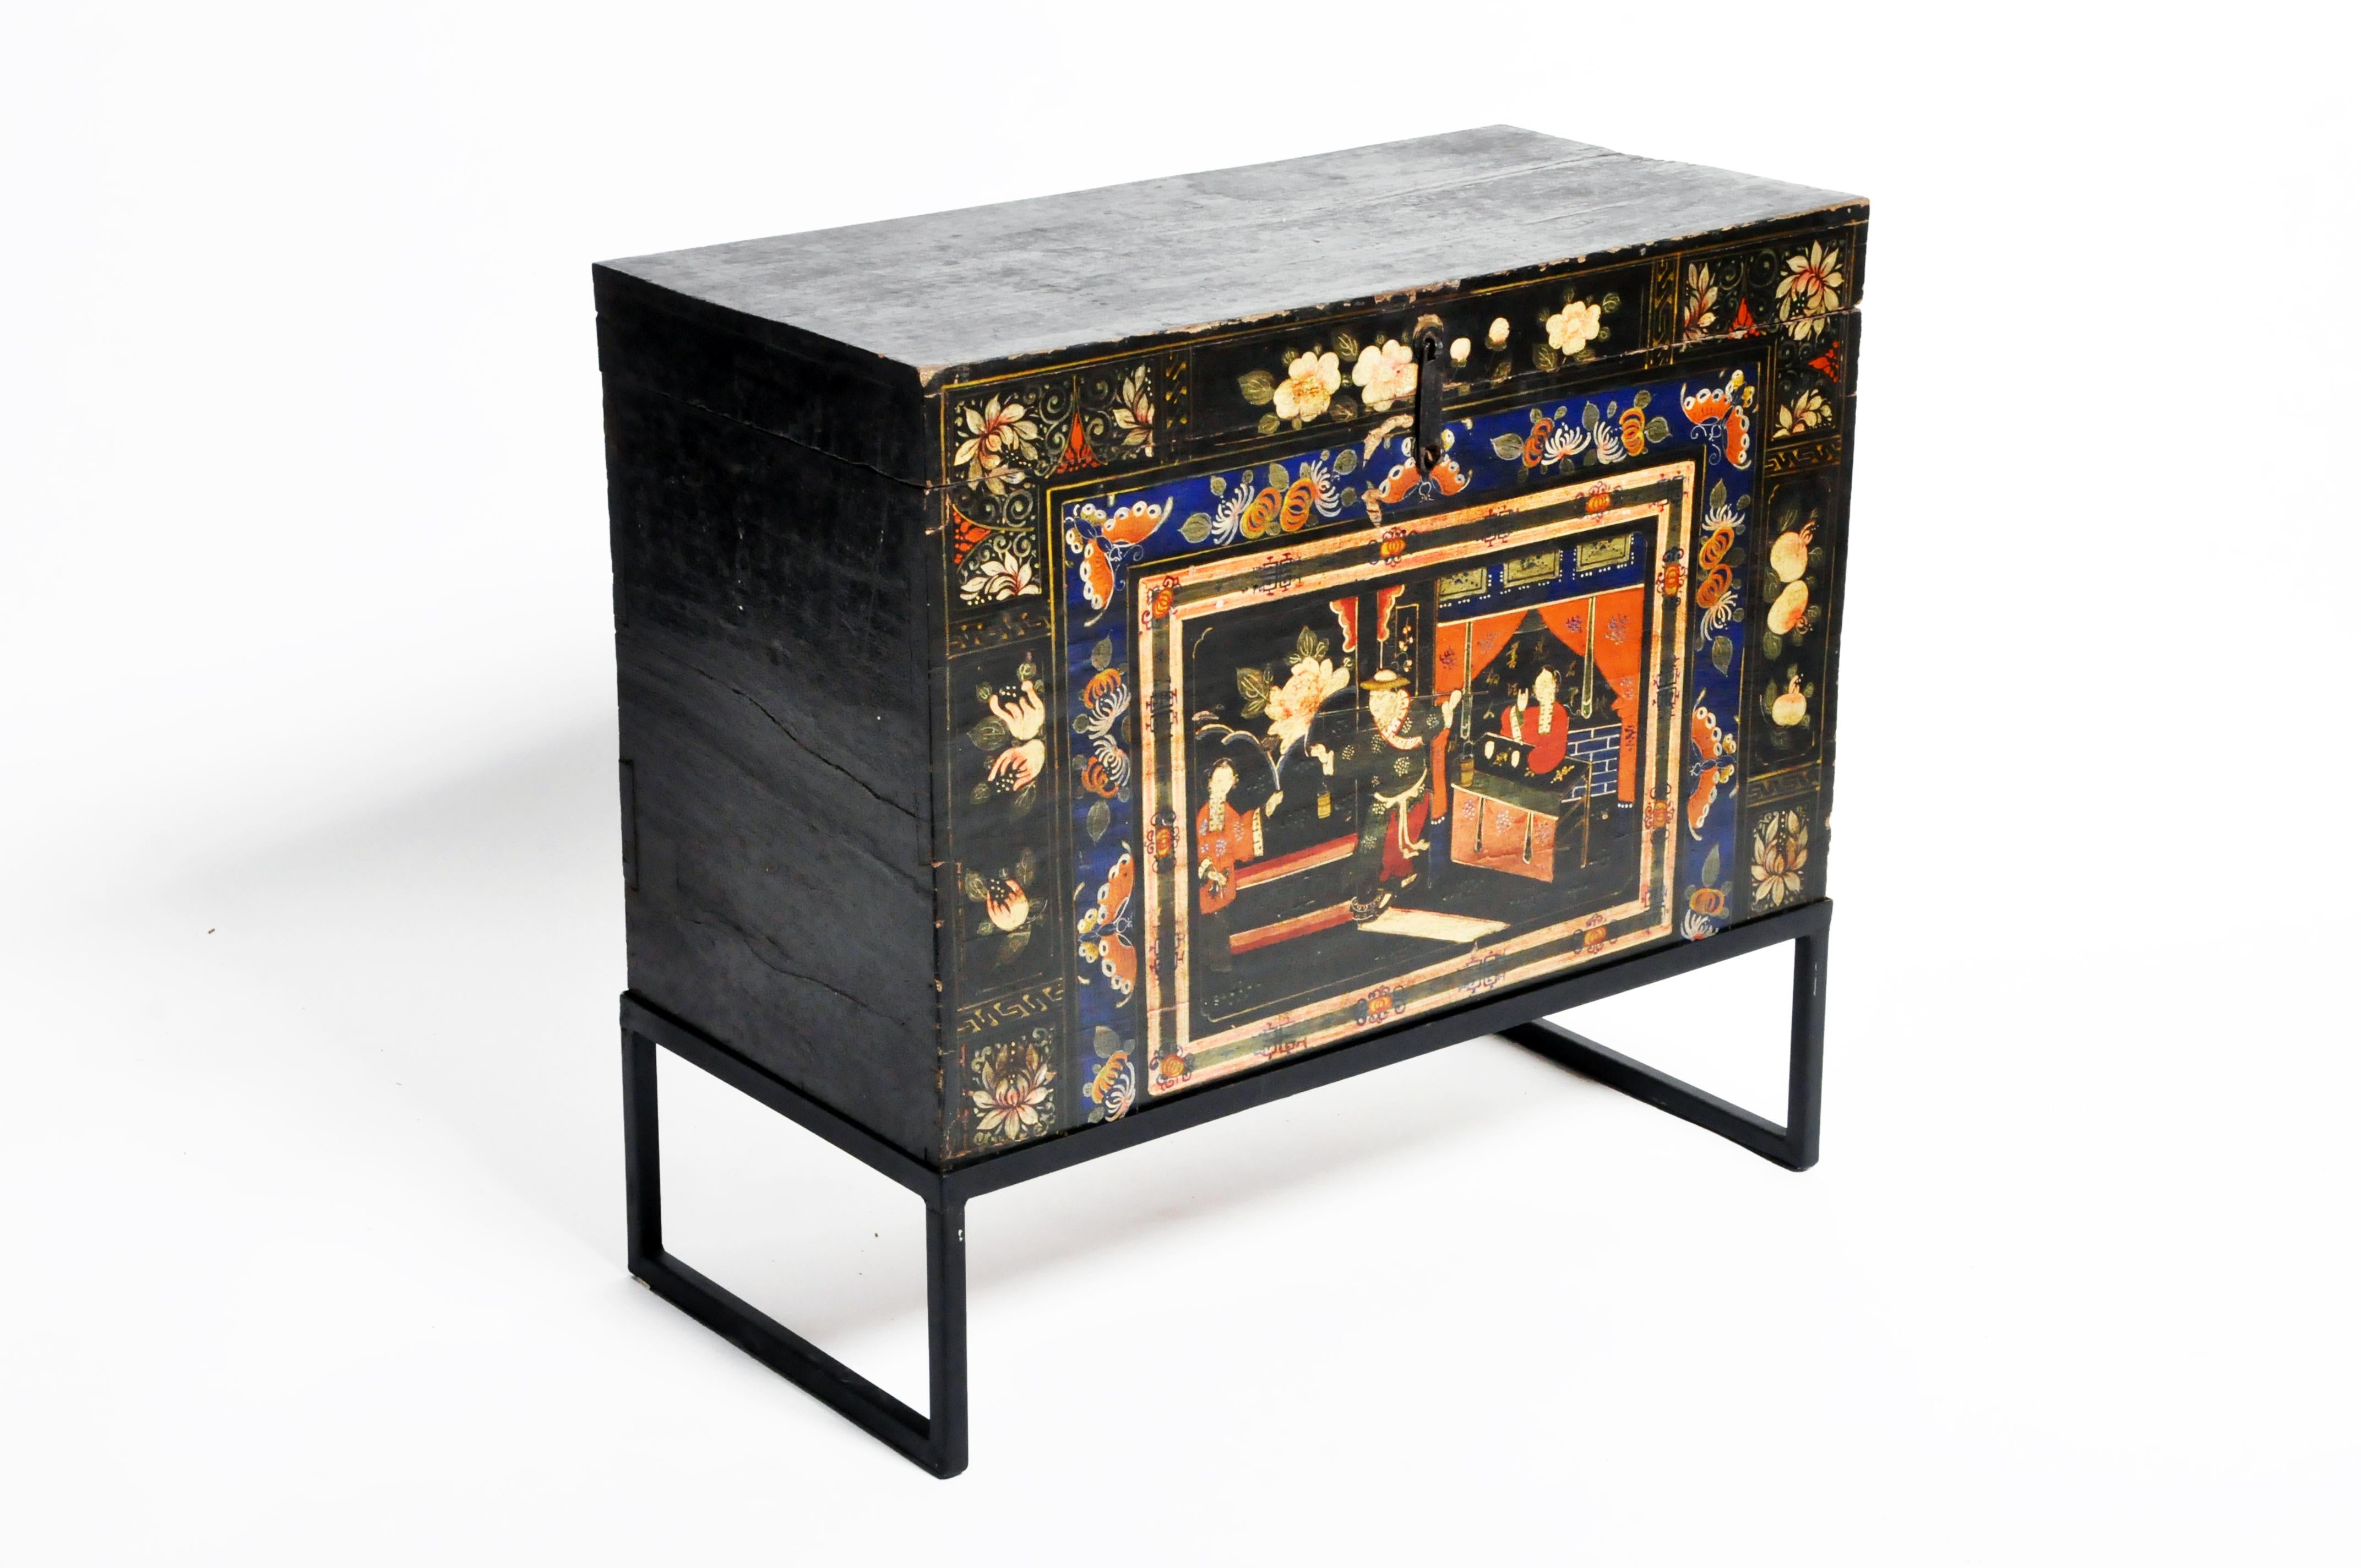 Late Qing Dynasty Storage Chest with Painting and Metal Base 10